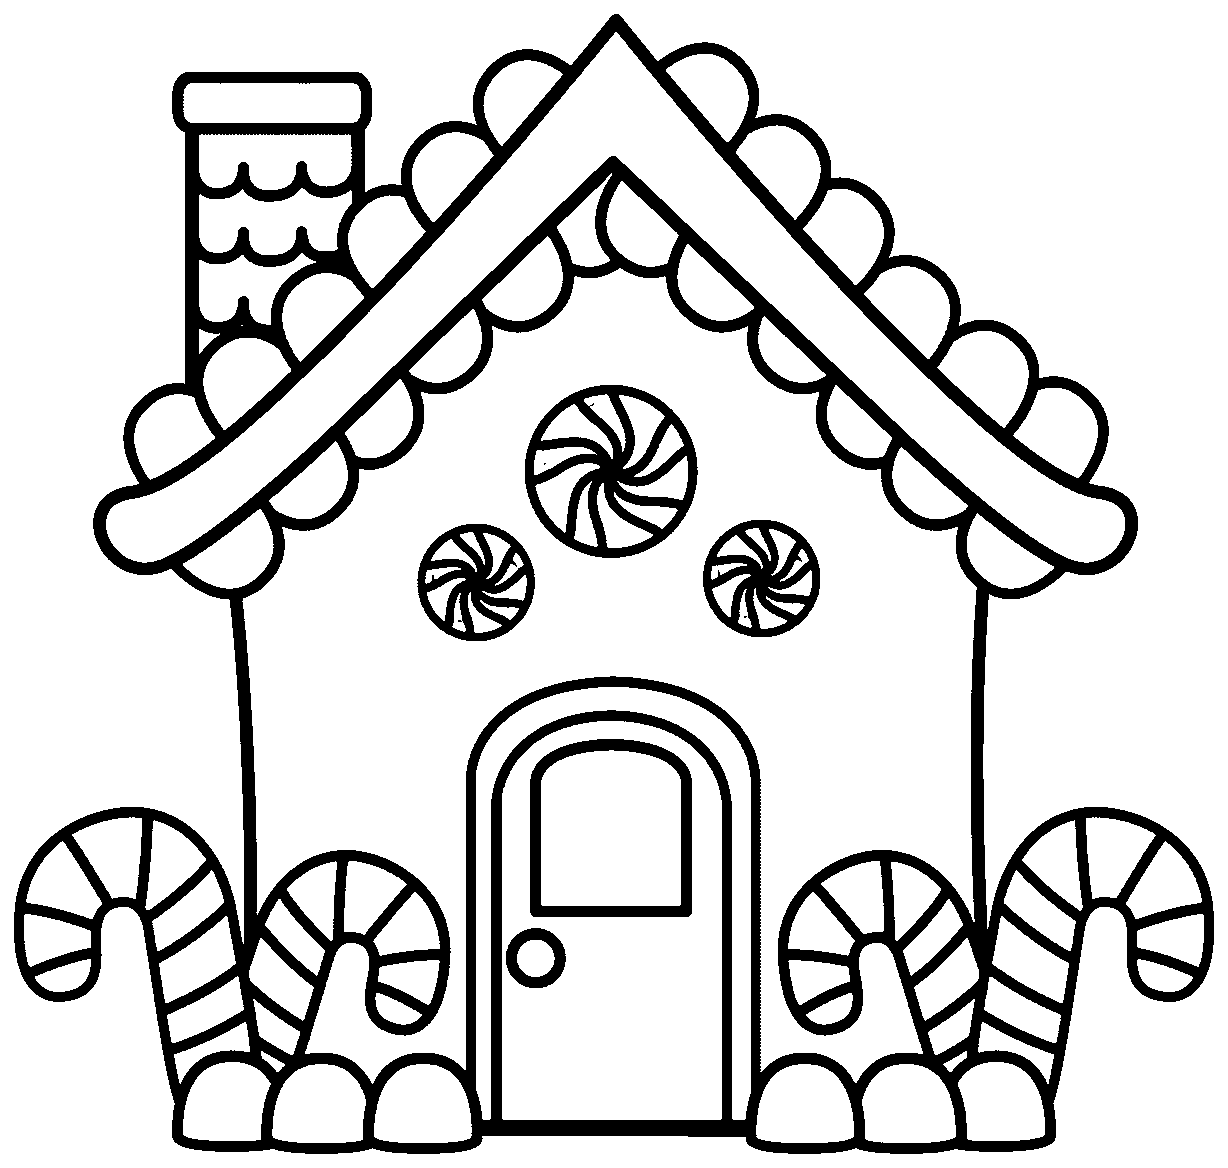 gingerbread house coloring page gingerbread house coloring pages getcoloringpagescom page gingerbread coloring house 